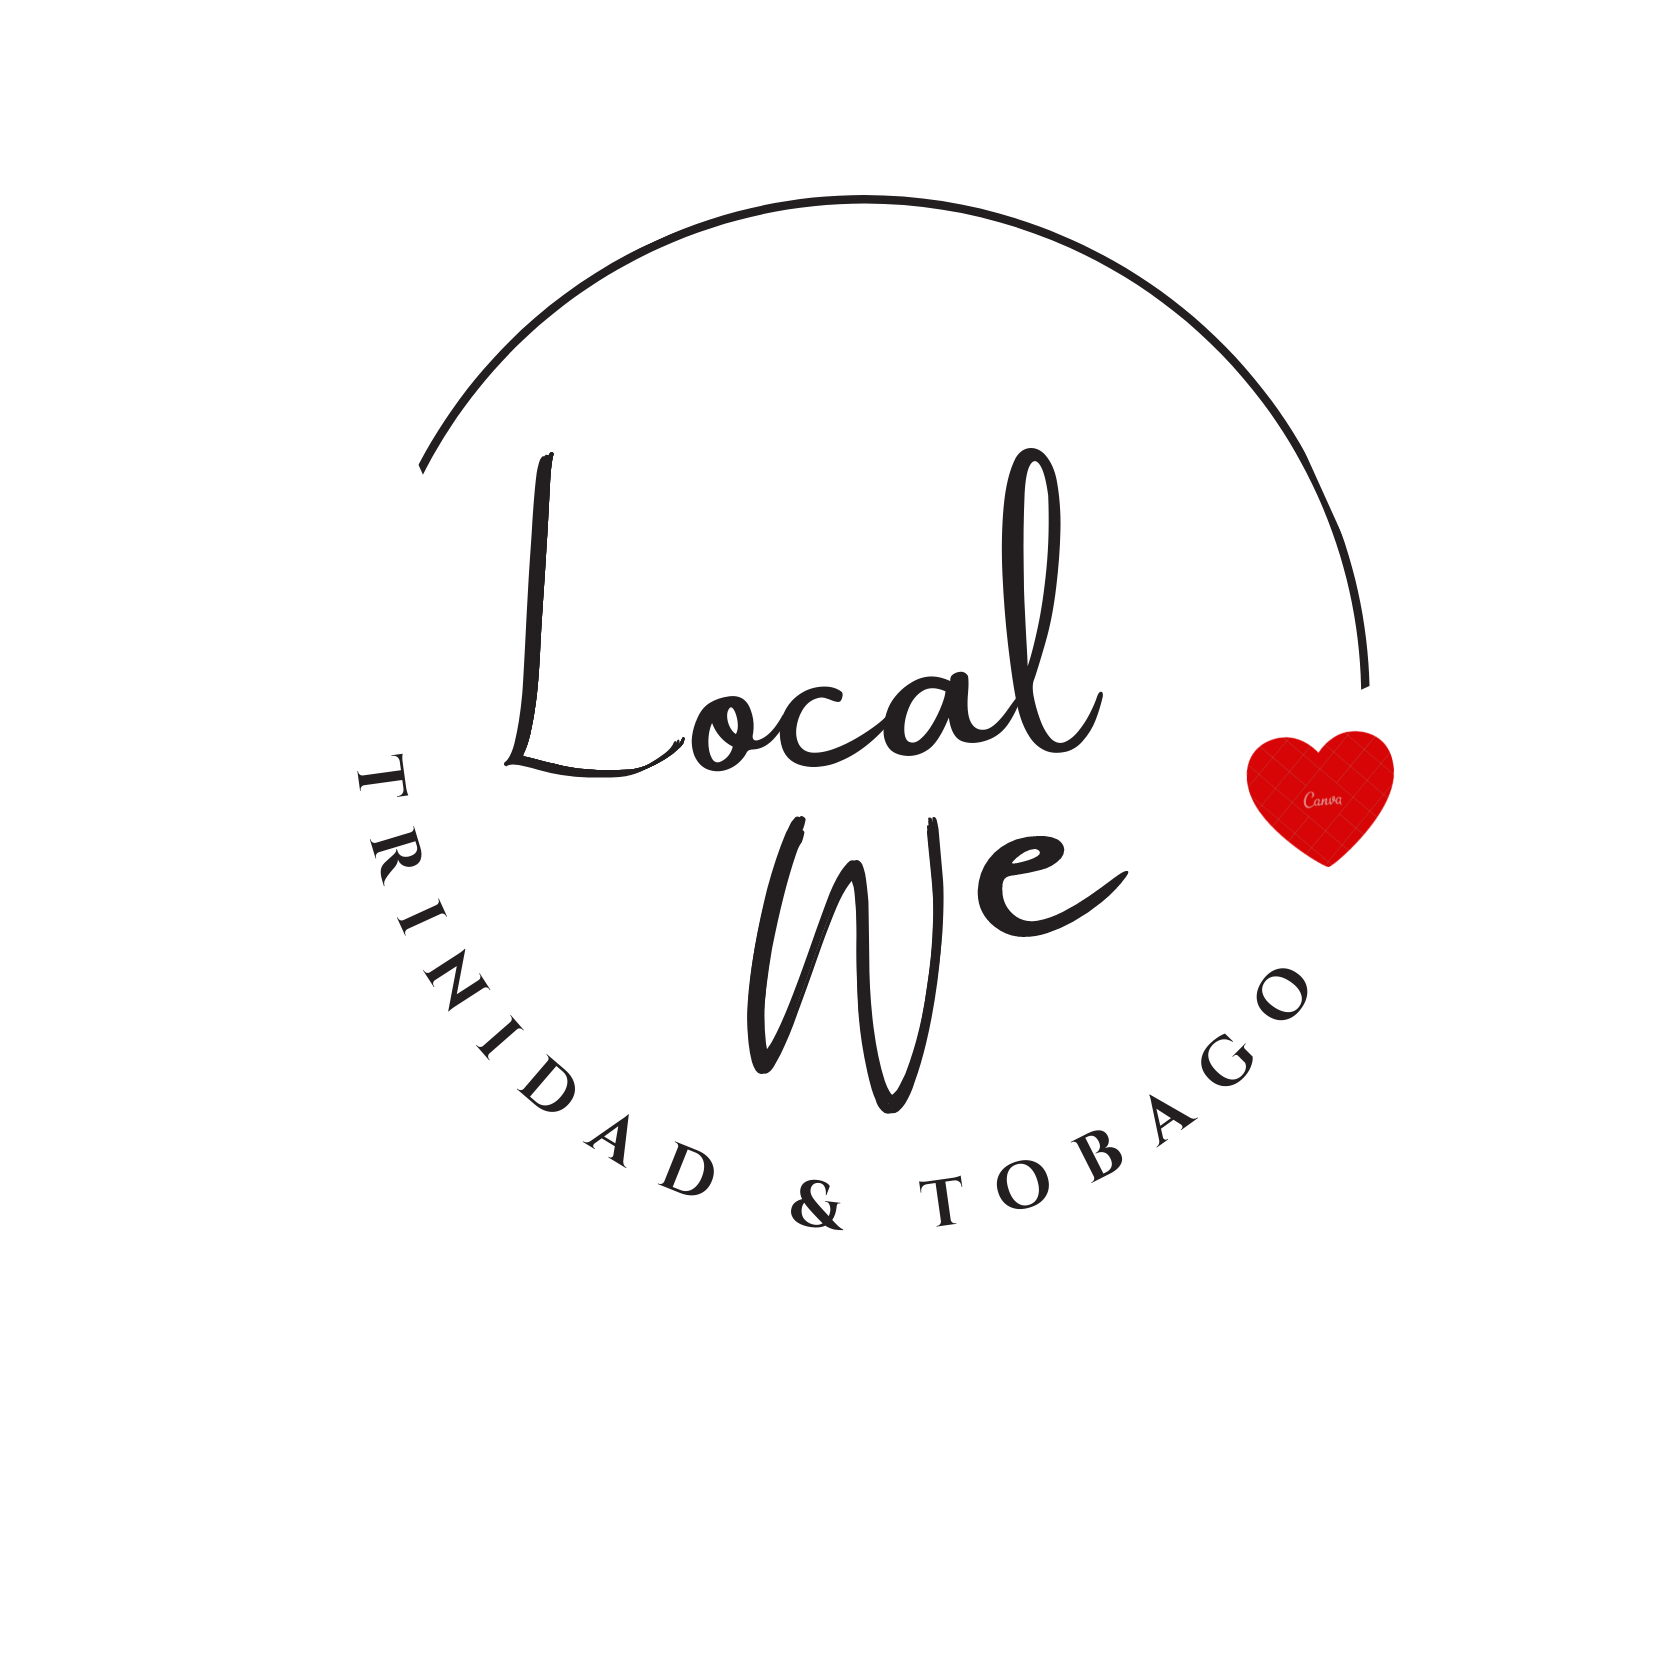 Support Local!